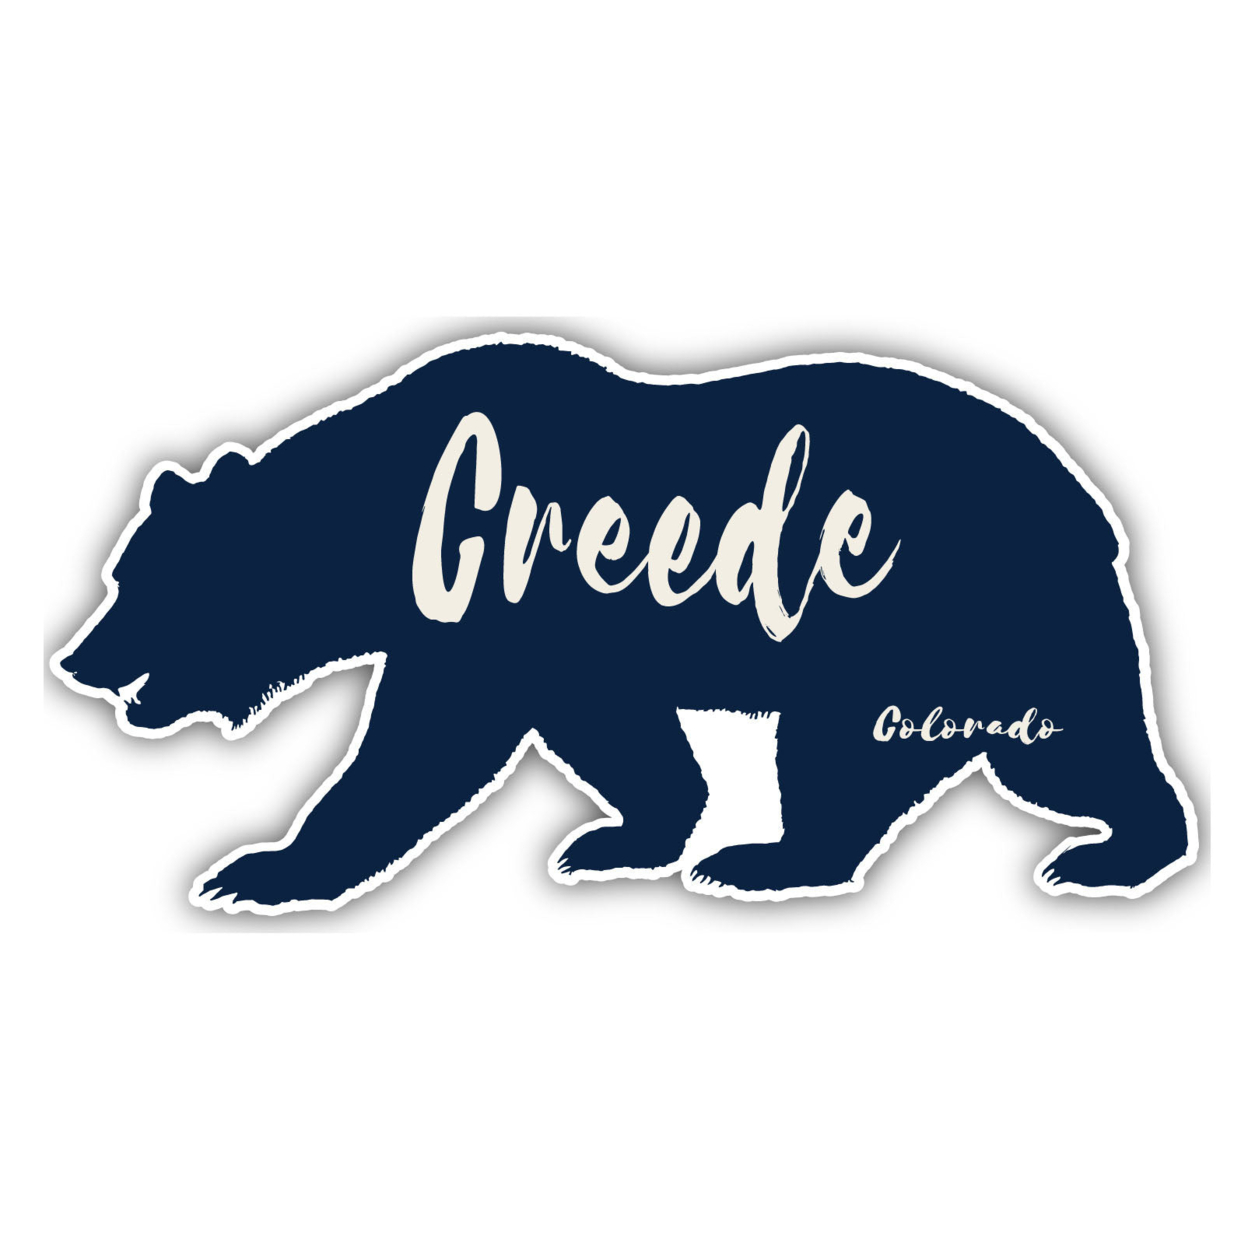 Creede Colorado Souvenir Decorative Stickers (Choose Theme And Size) - 4-Pack, 8-Inch, Tent